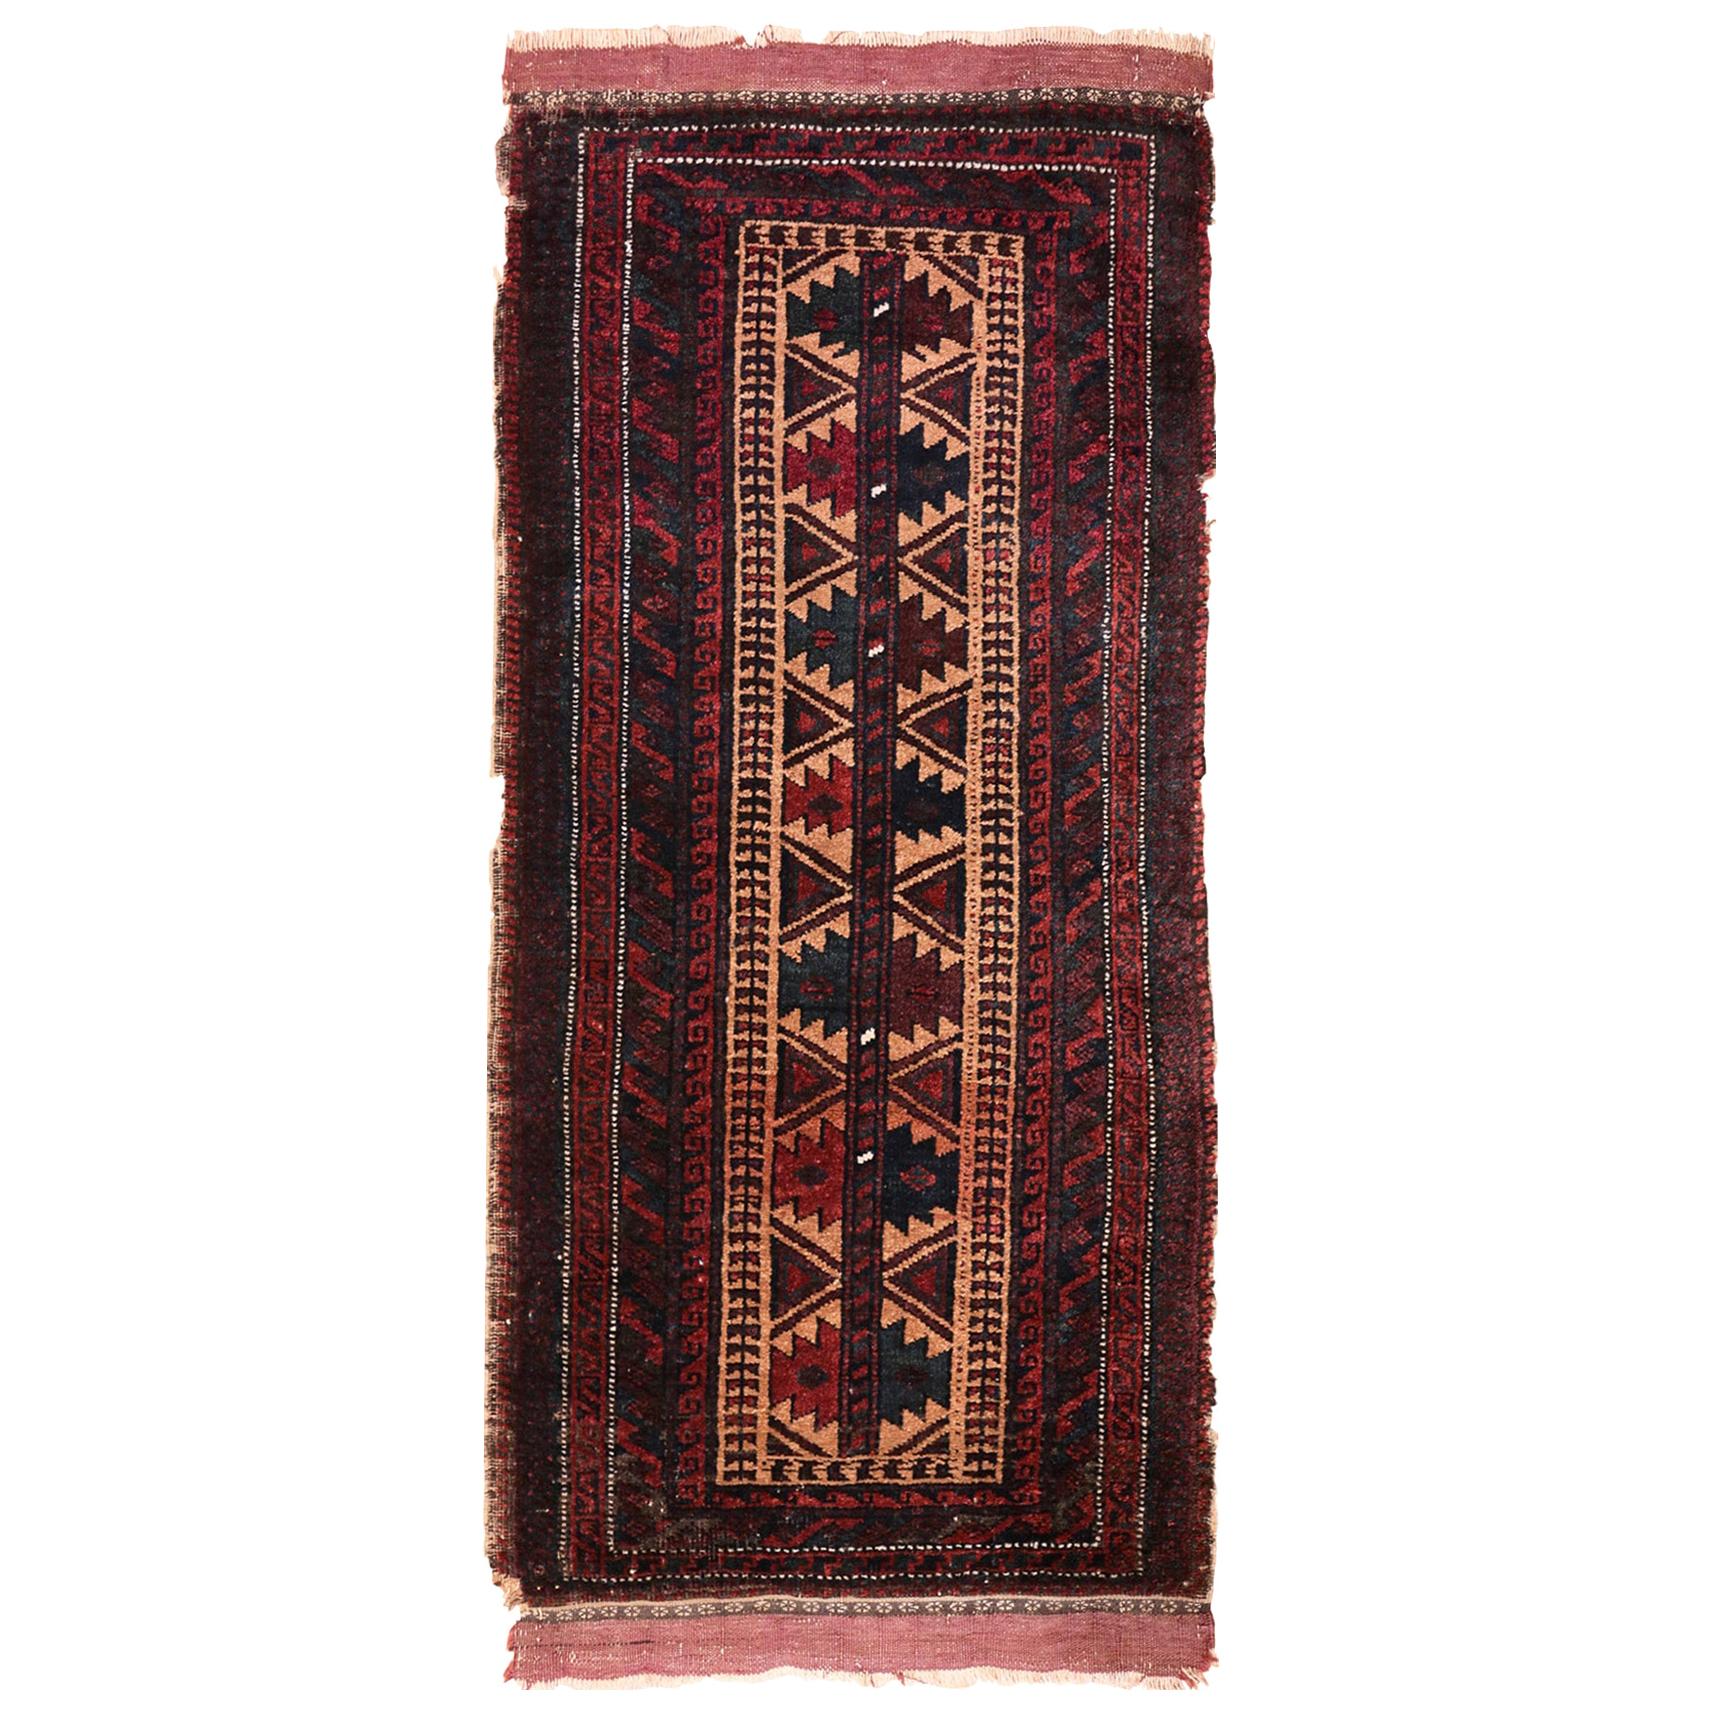 Small Scatter Size Antique Persian Baluch Rug